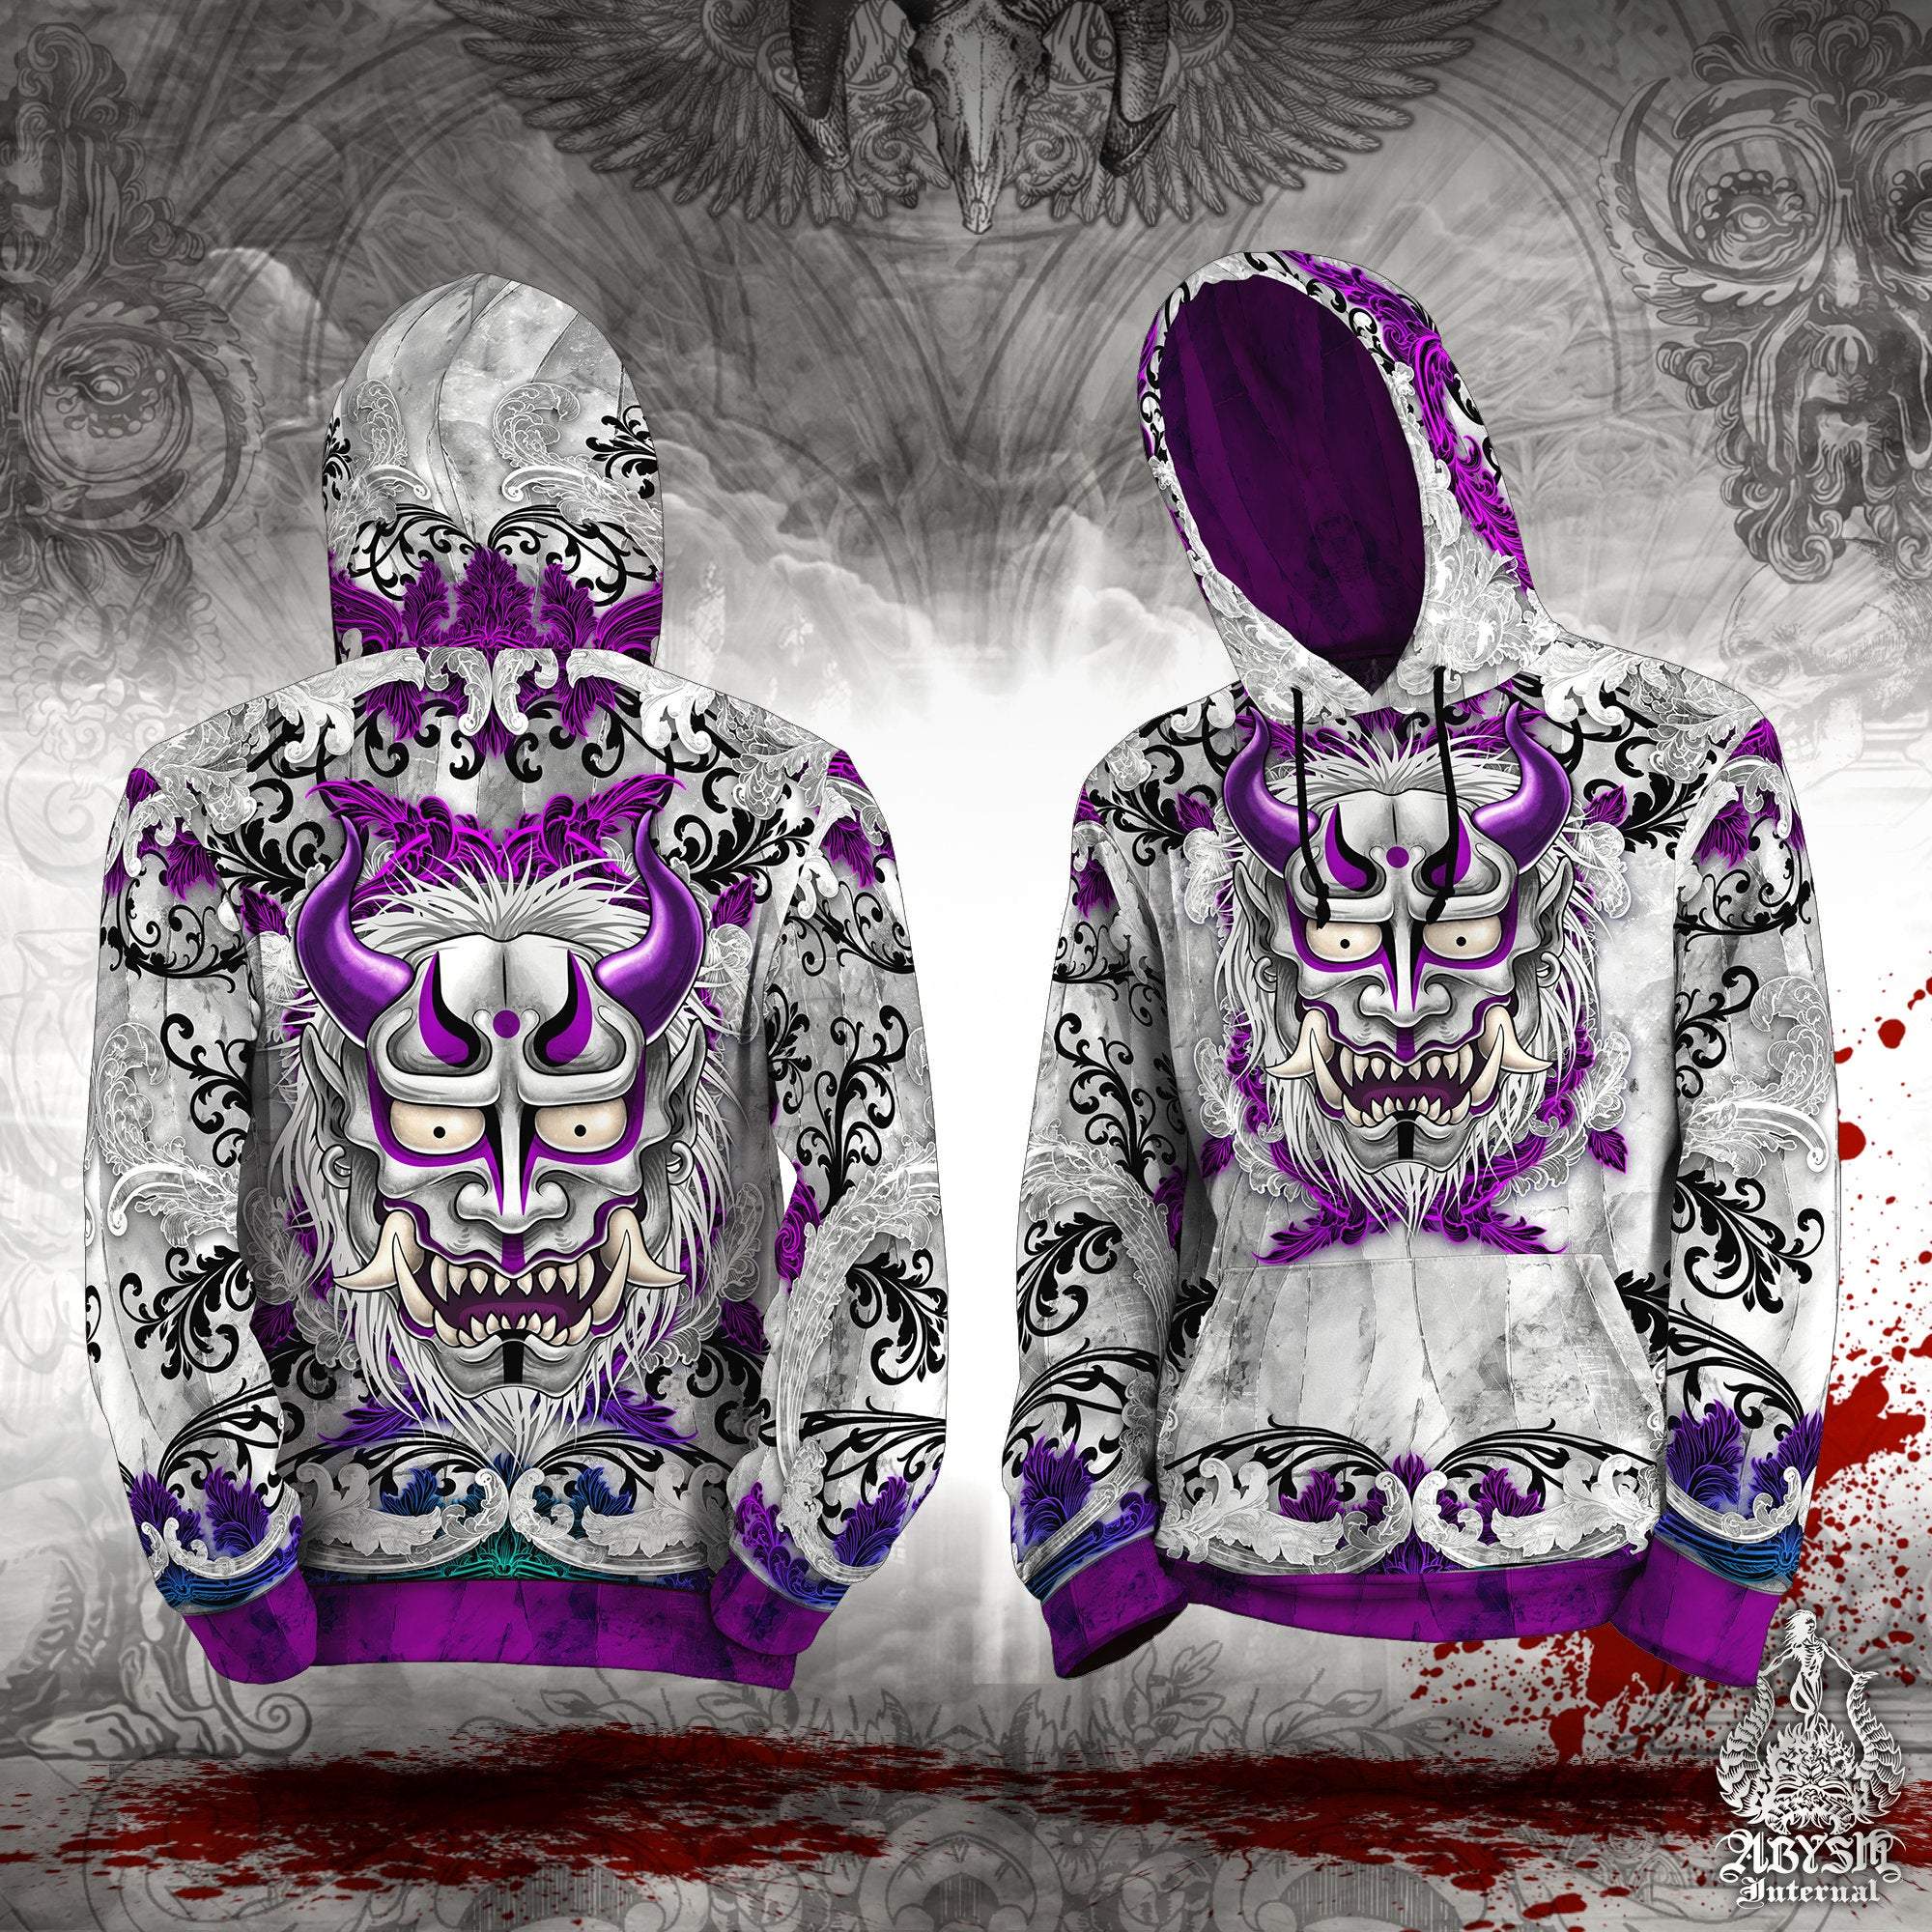 Oni Demon Hoodie, Japanese Streetwear, Graffiti and Street Outfit, Alternative Clothing, Unisex - Pastel and White Goth - Abysm Internal